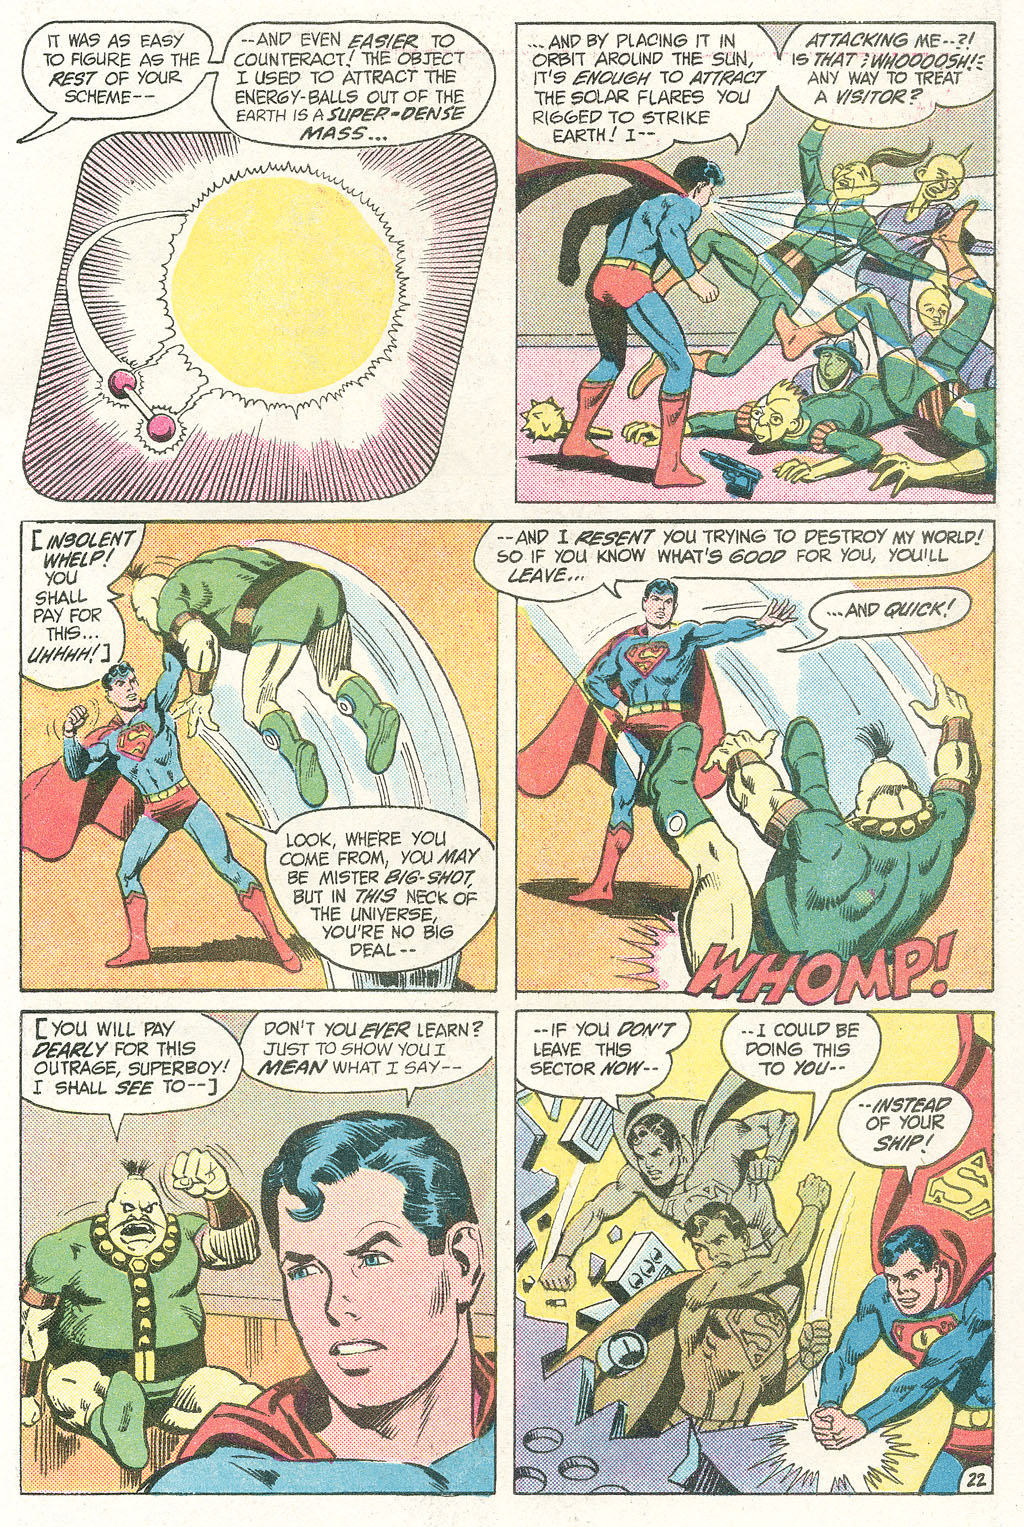 The New Adventures of Superboy 54 Page 30